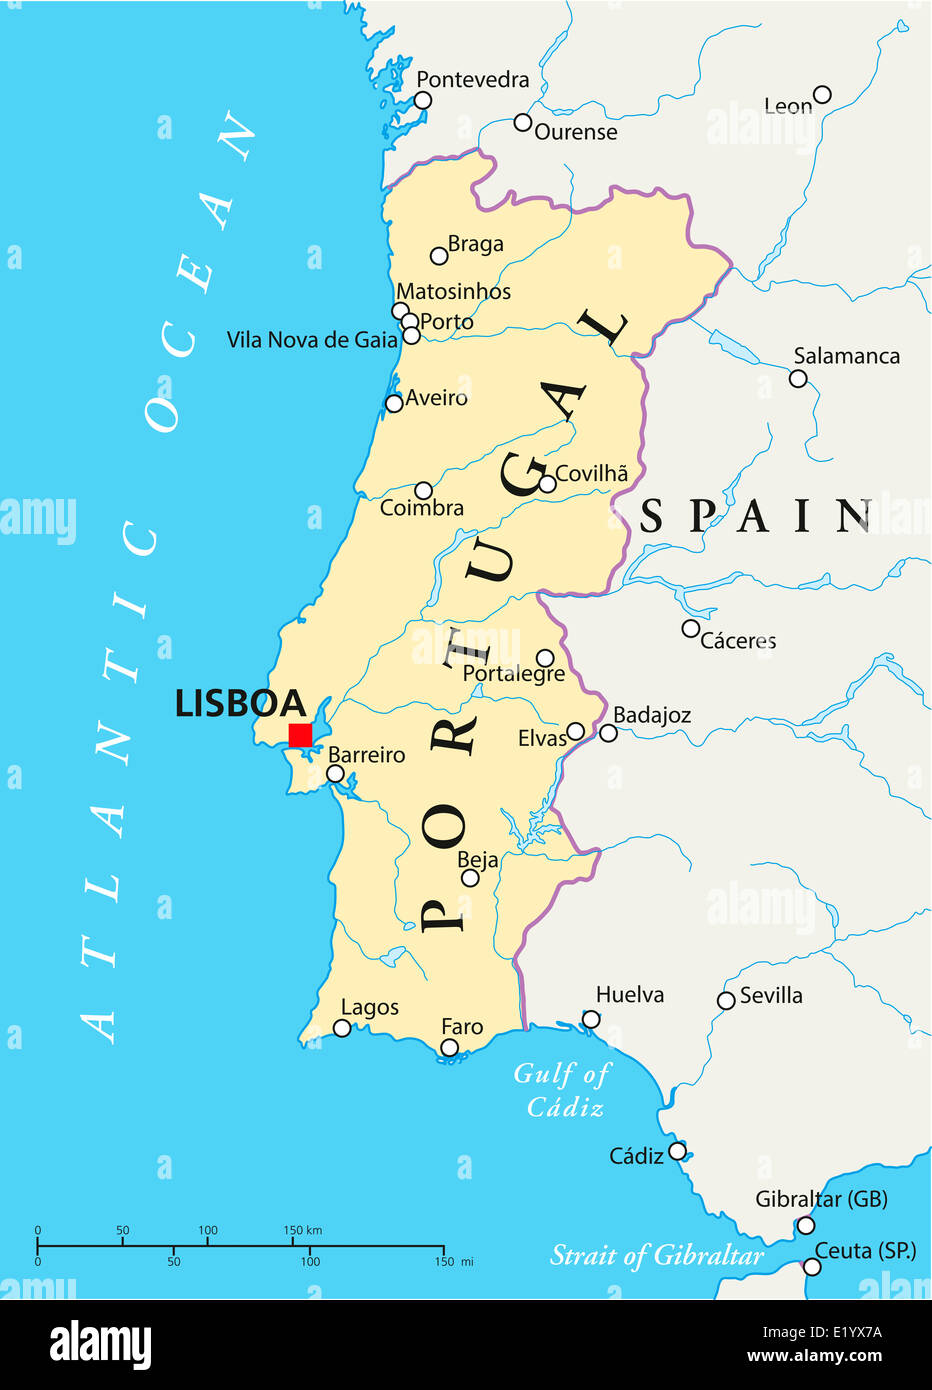 Portugal Political Map with capital Lisbon, national borders, most